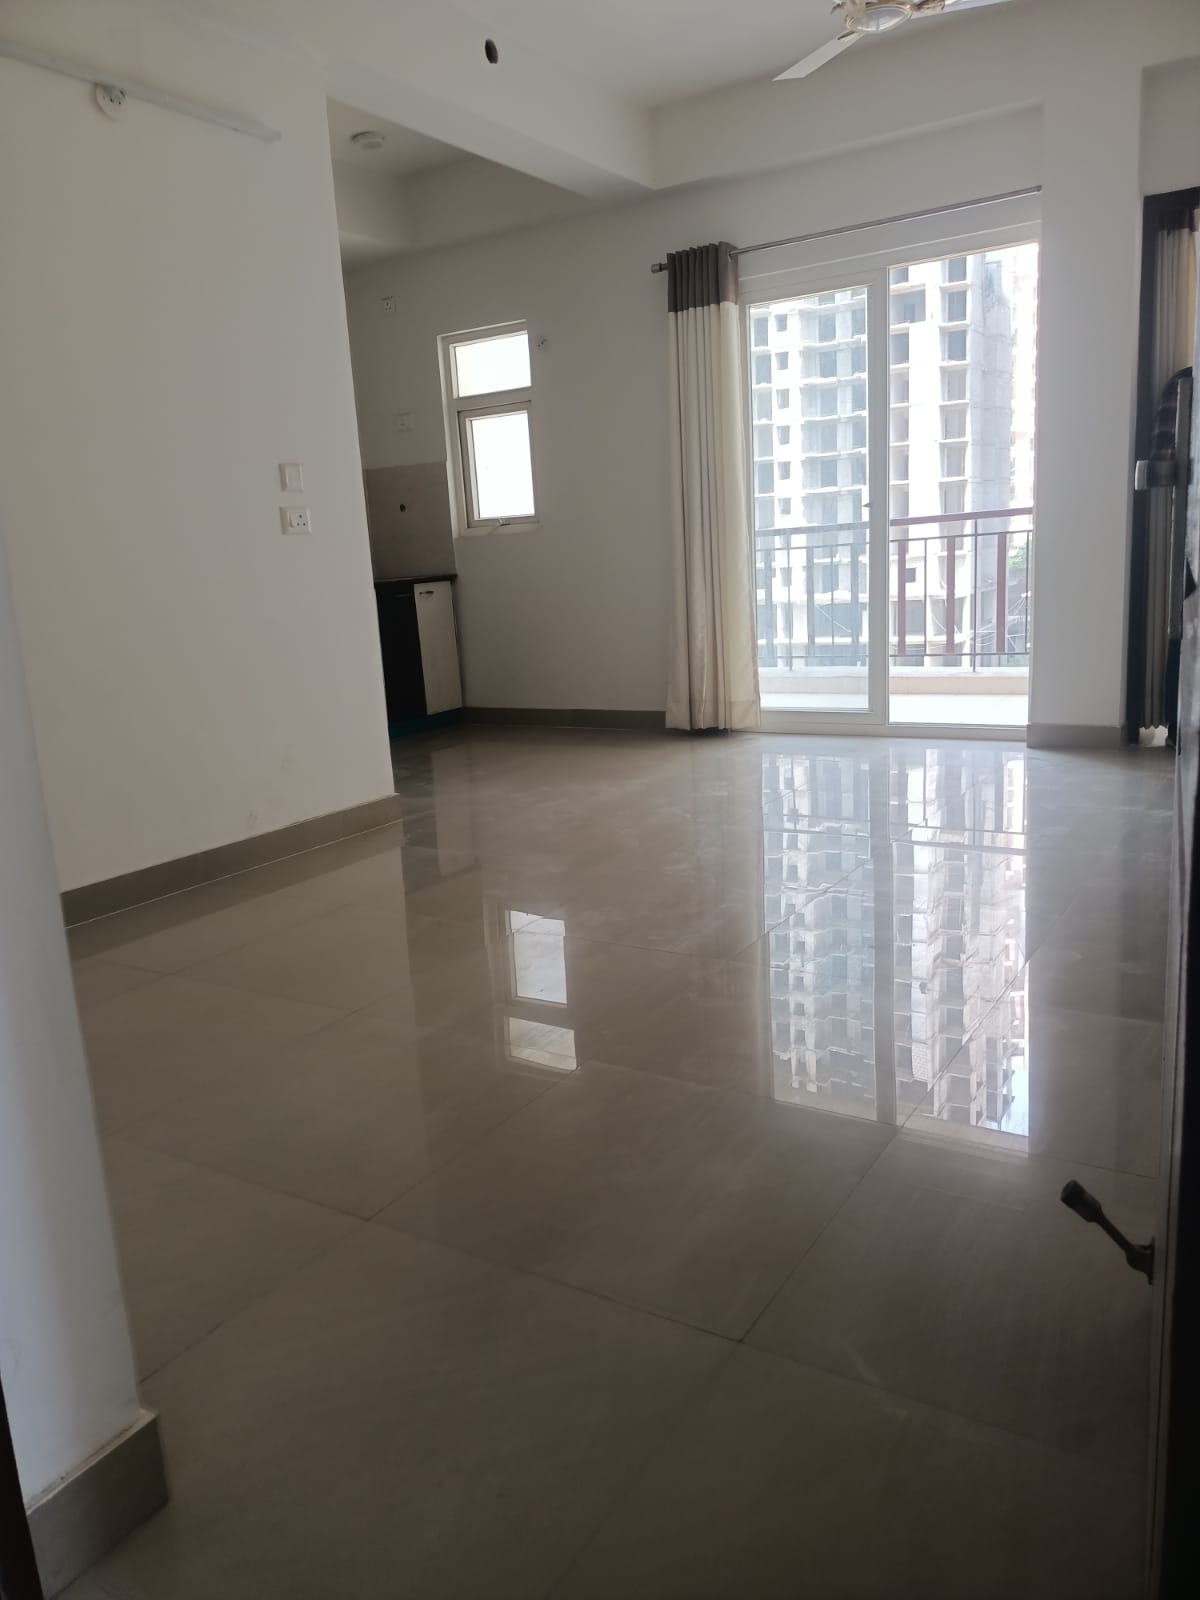 2 BHK Residential Flat For Sale in La Palacia, Greater Noida West